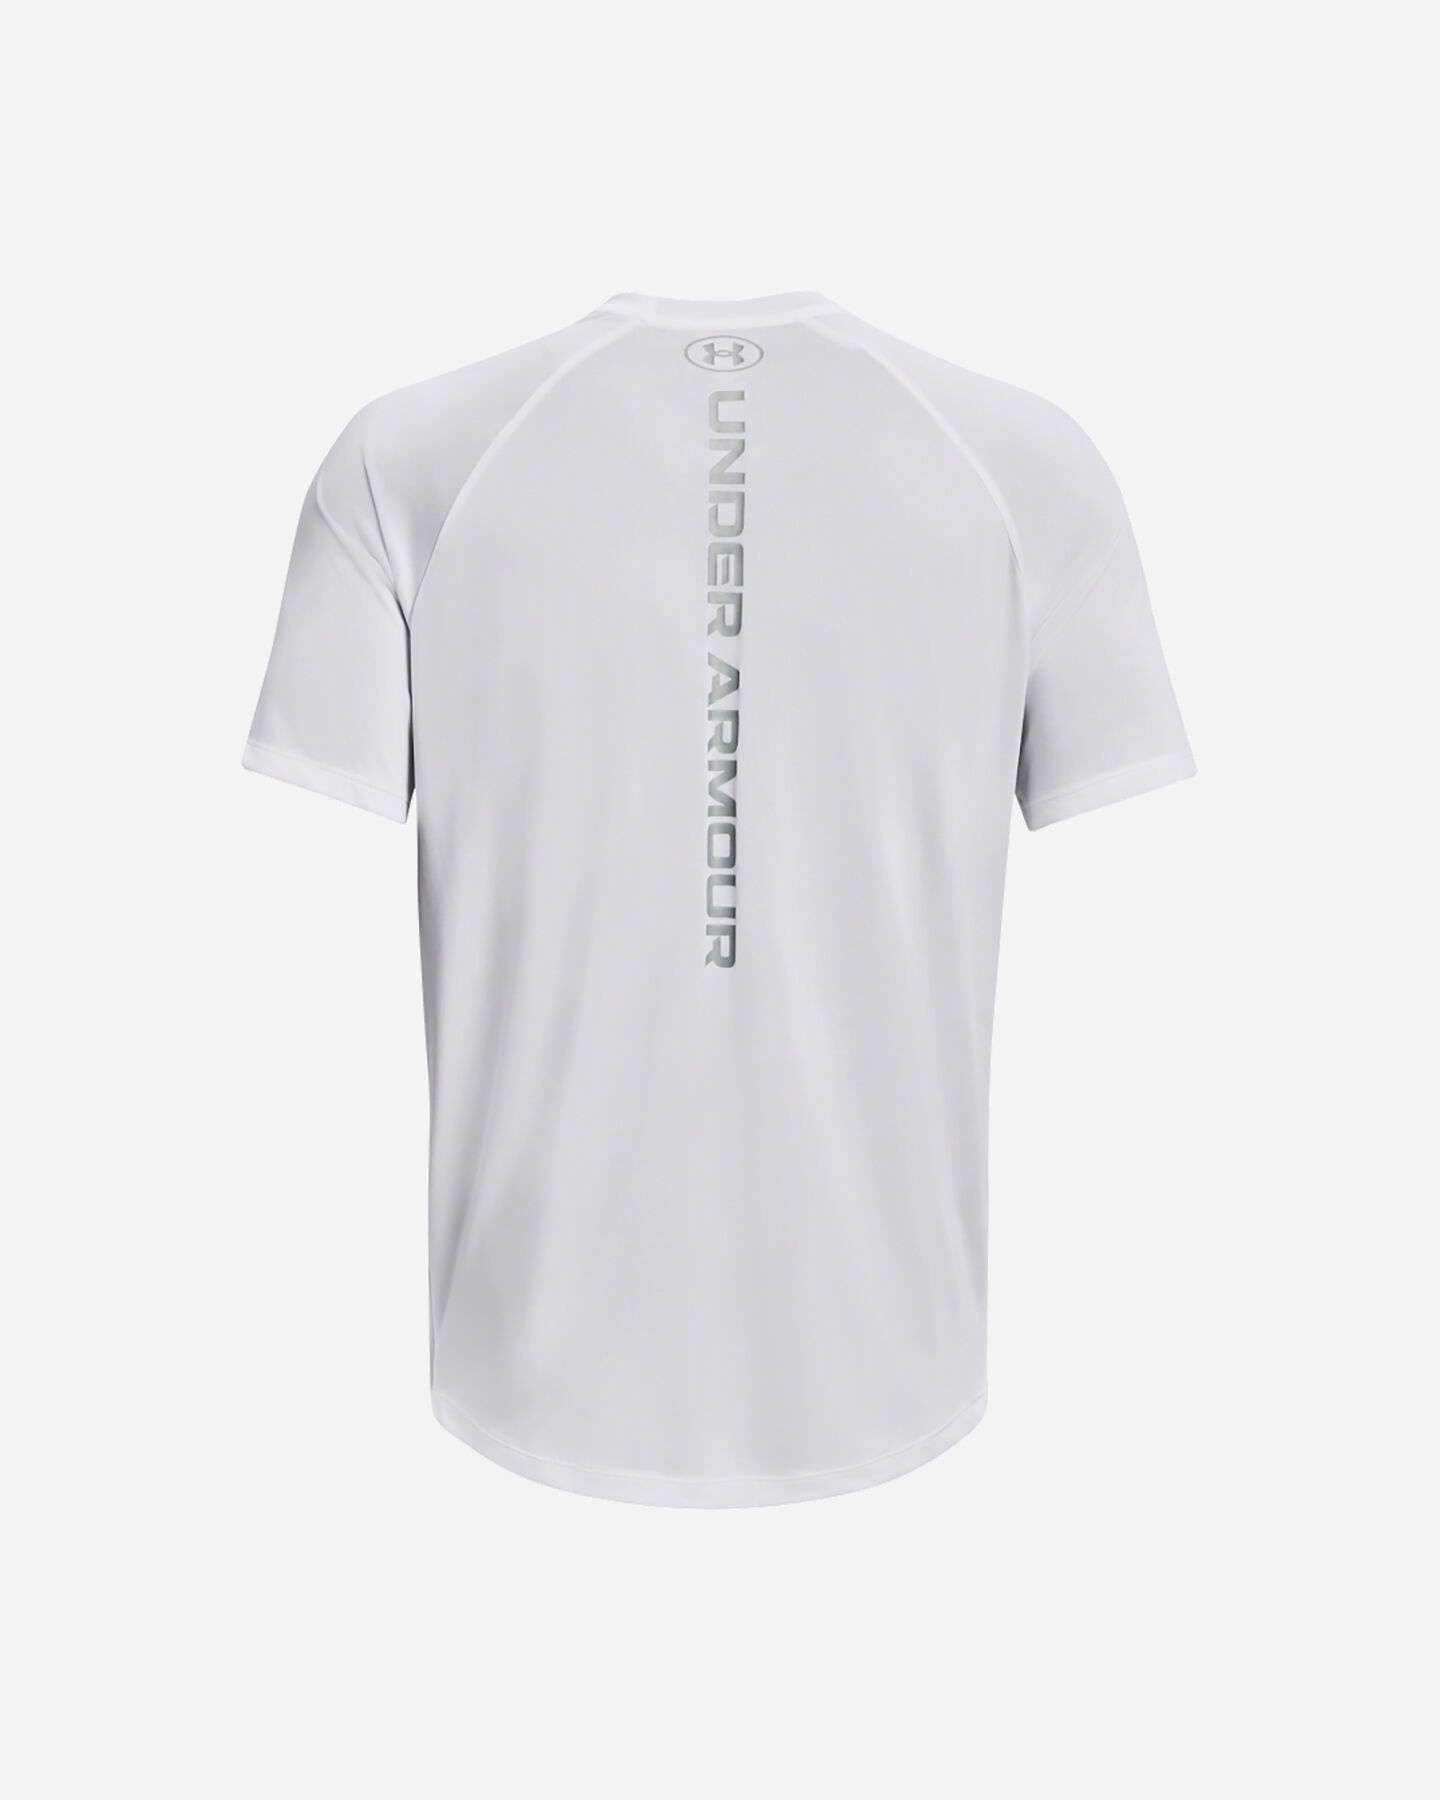  T-Shirt training UNDER ARMOUR TECH REFLECTIVE M S5528716|0100|SM scatto 1